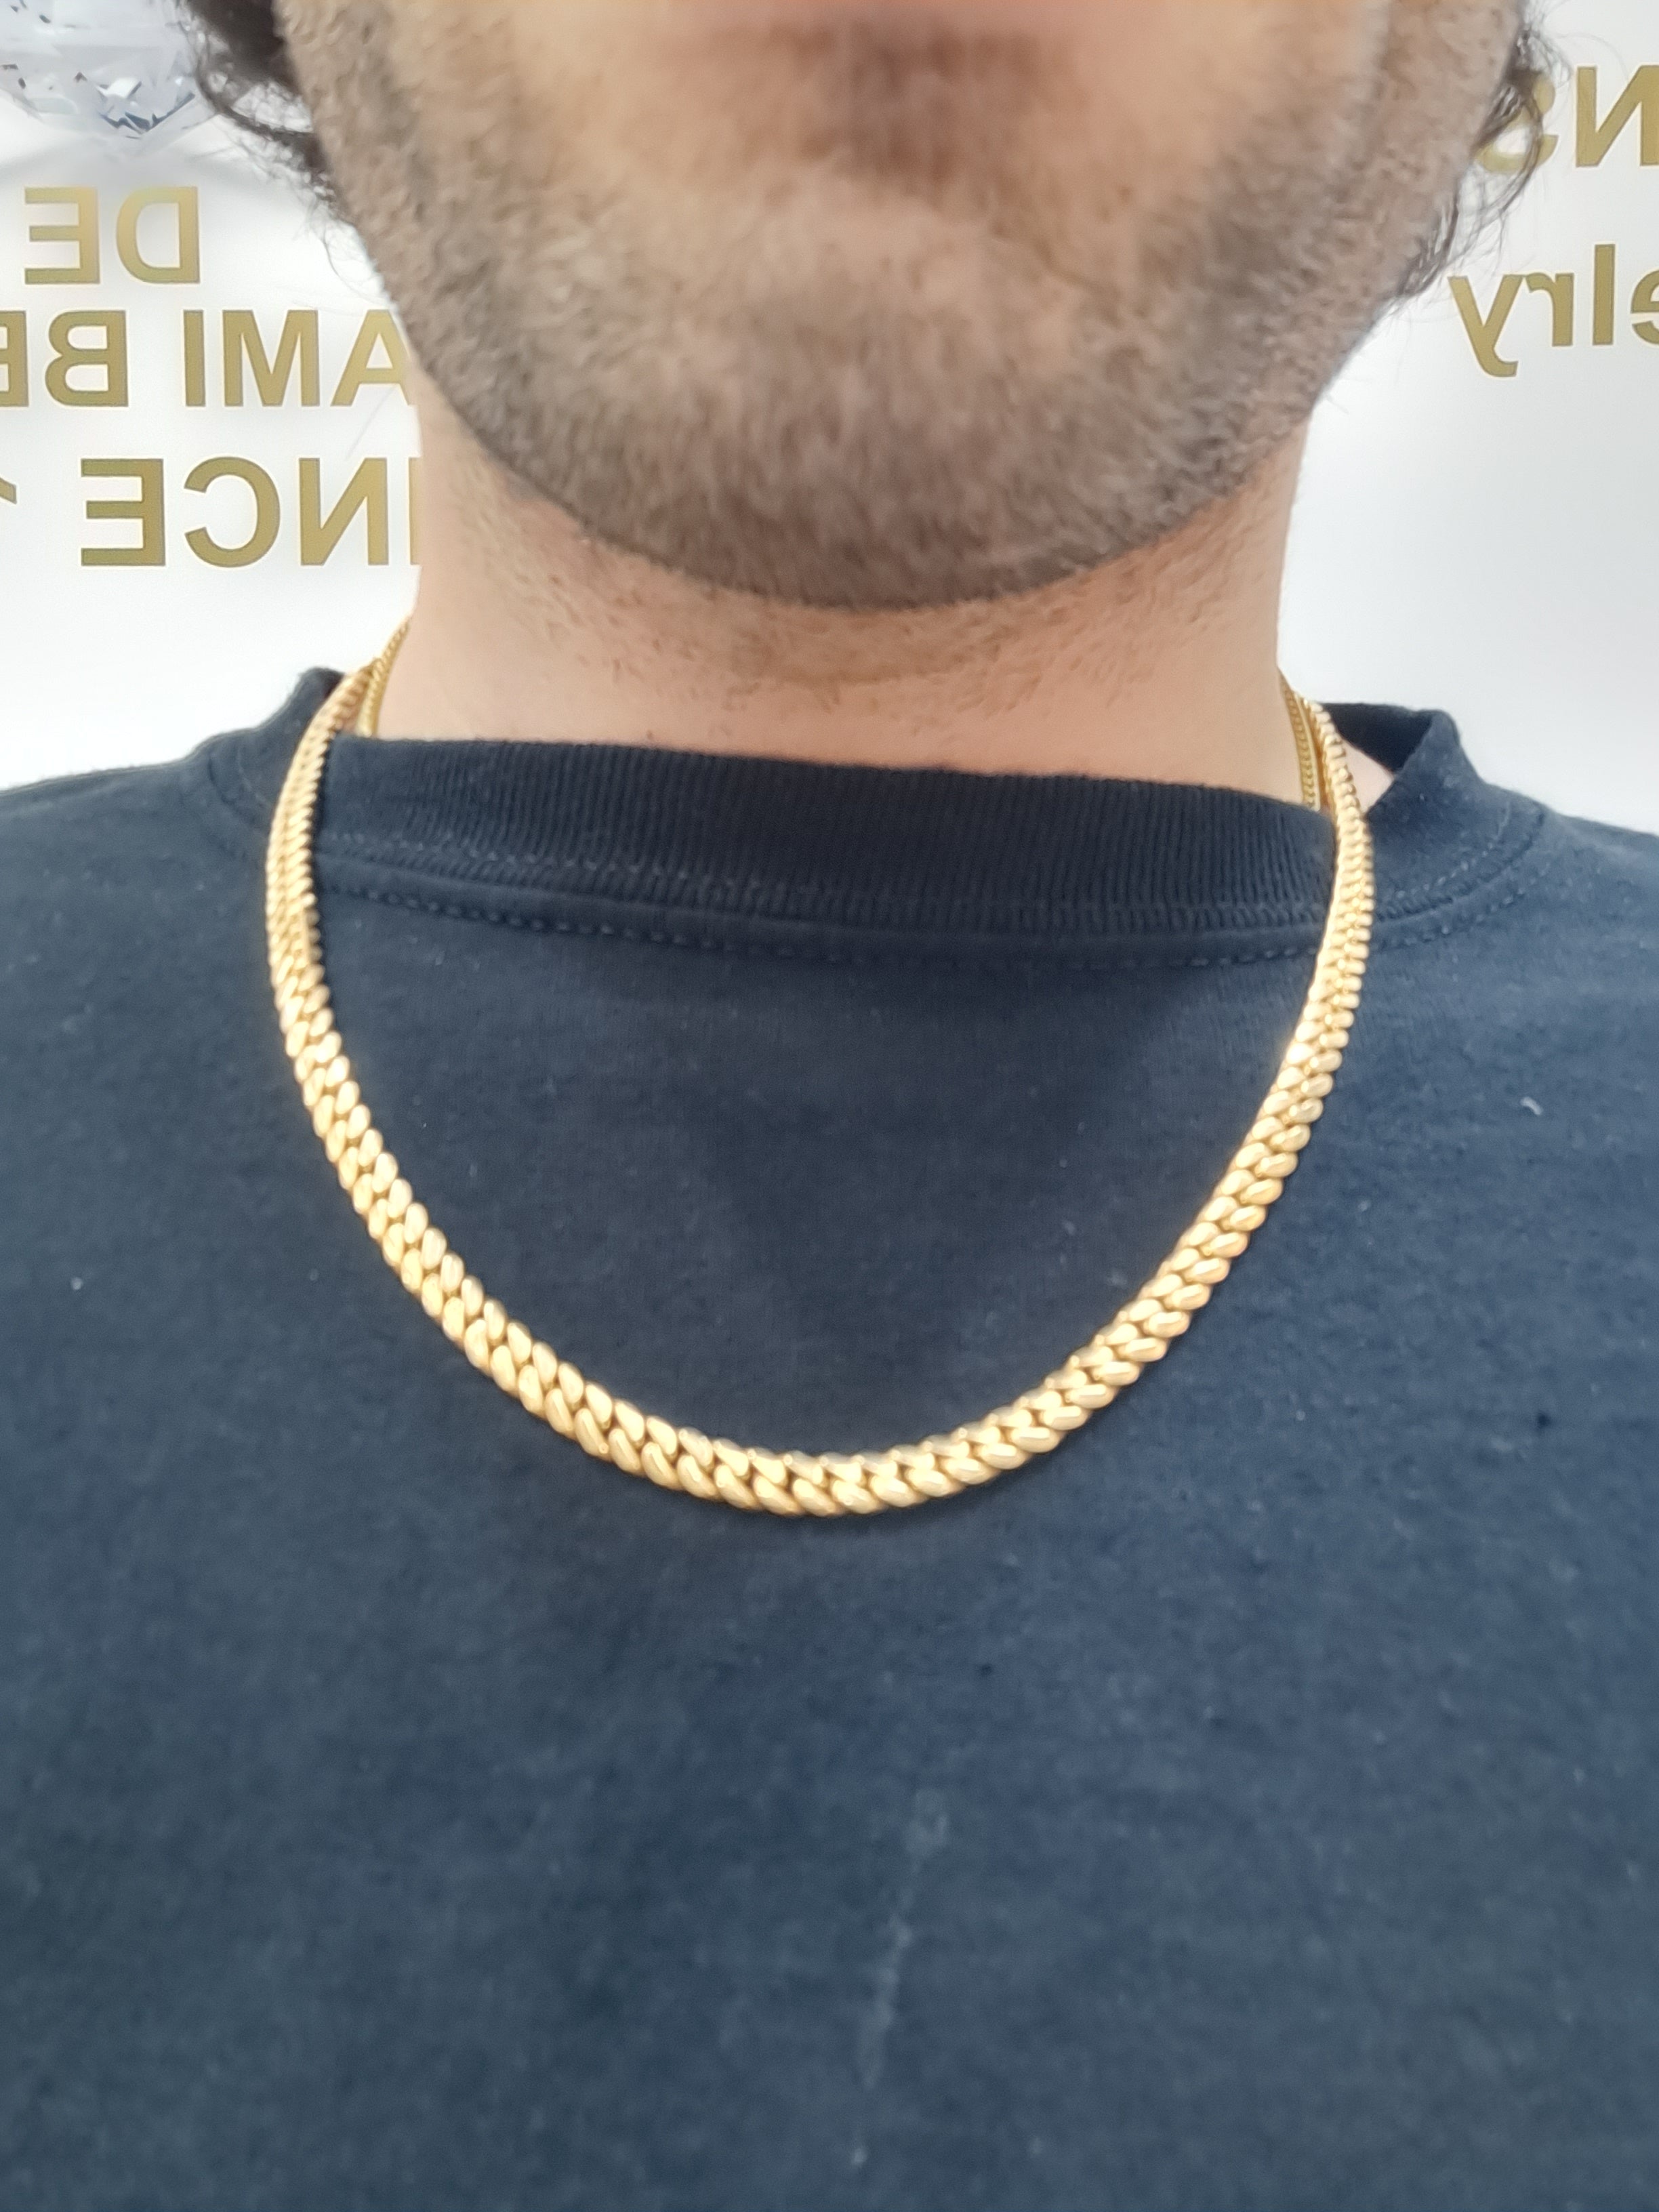 solid 10k new miami cuban link 45 grams  5.4mm  24inch